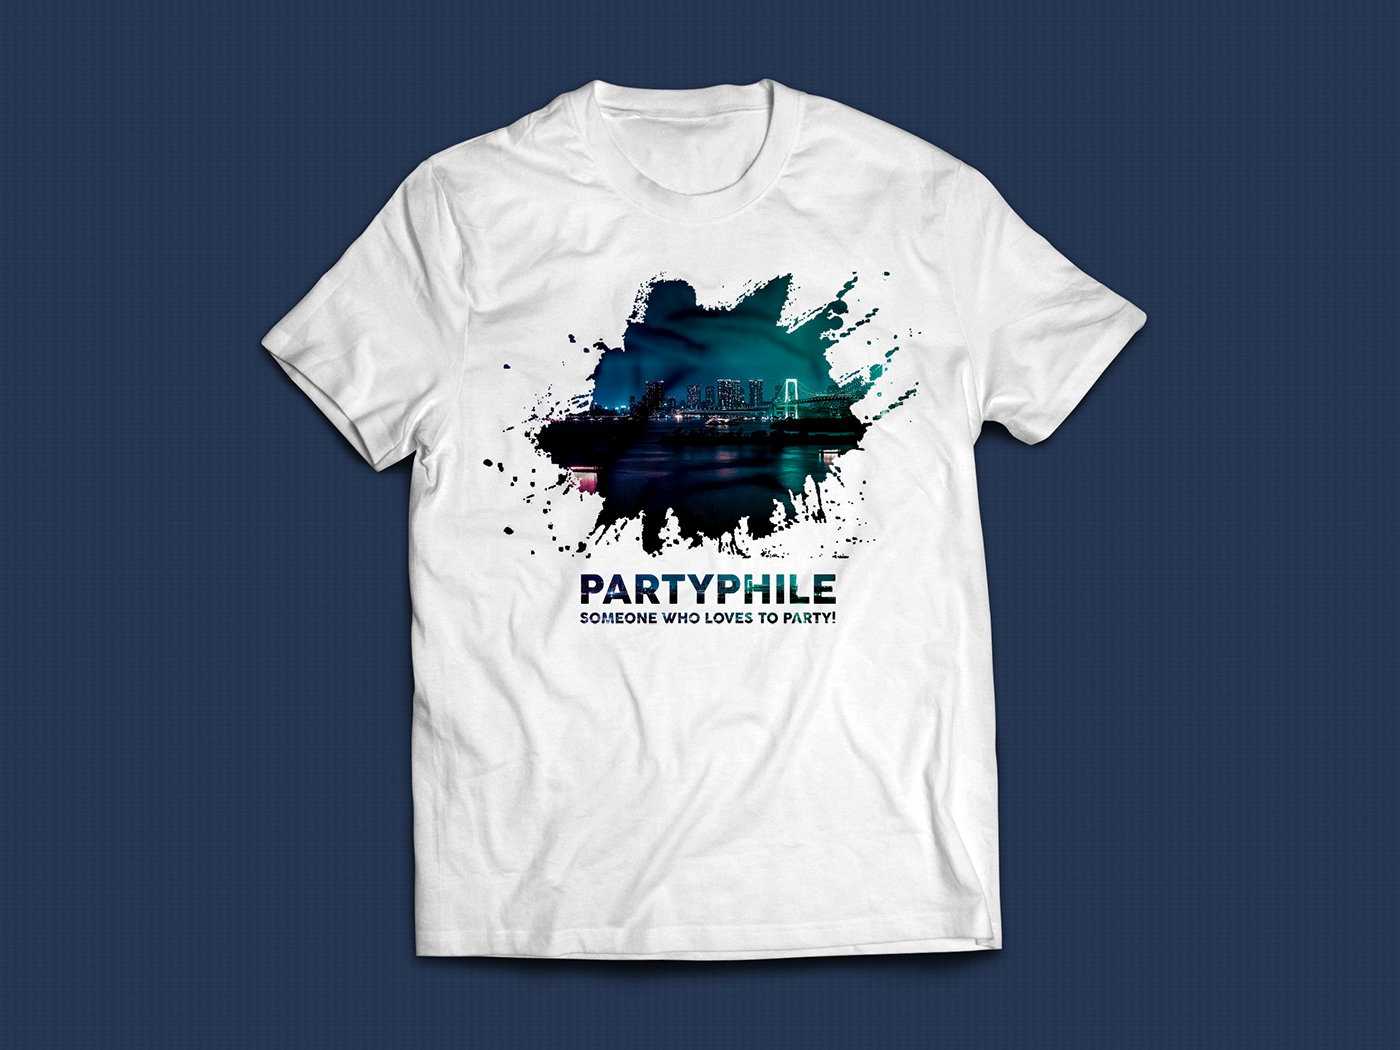 about town Leisure Mockup Outdoor relax shirt T Shirt and it high resolution Illustrator